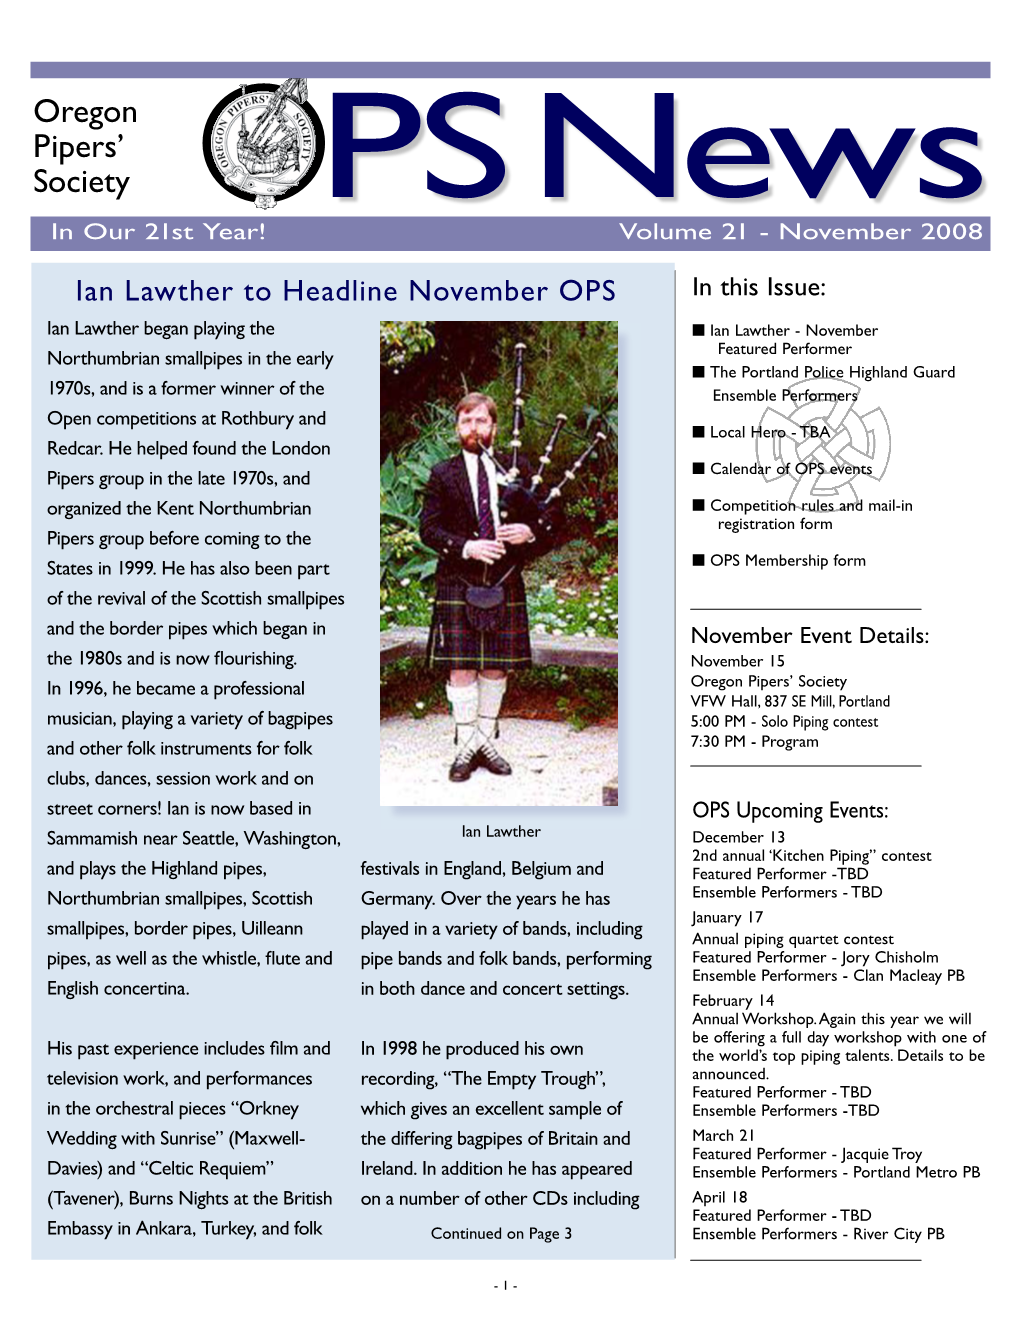 Oregon Pipers' Society